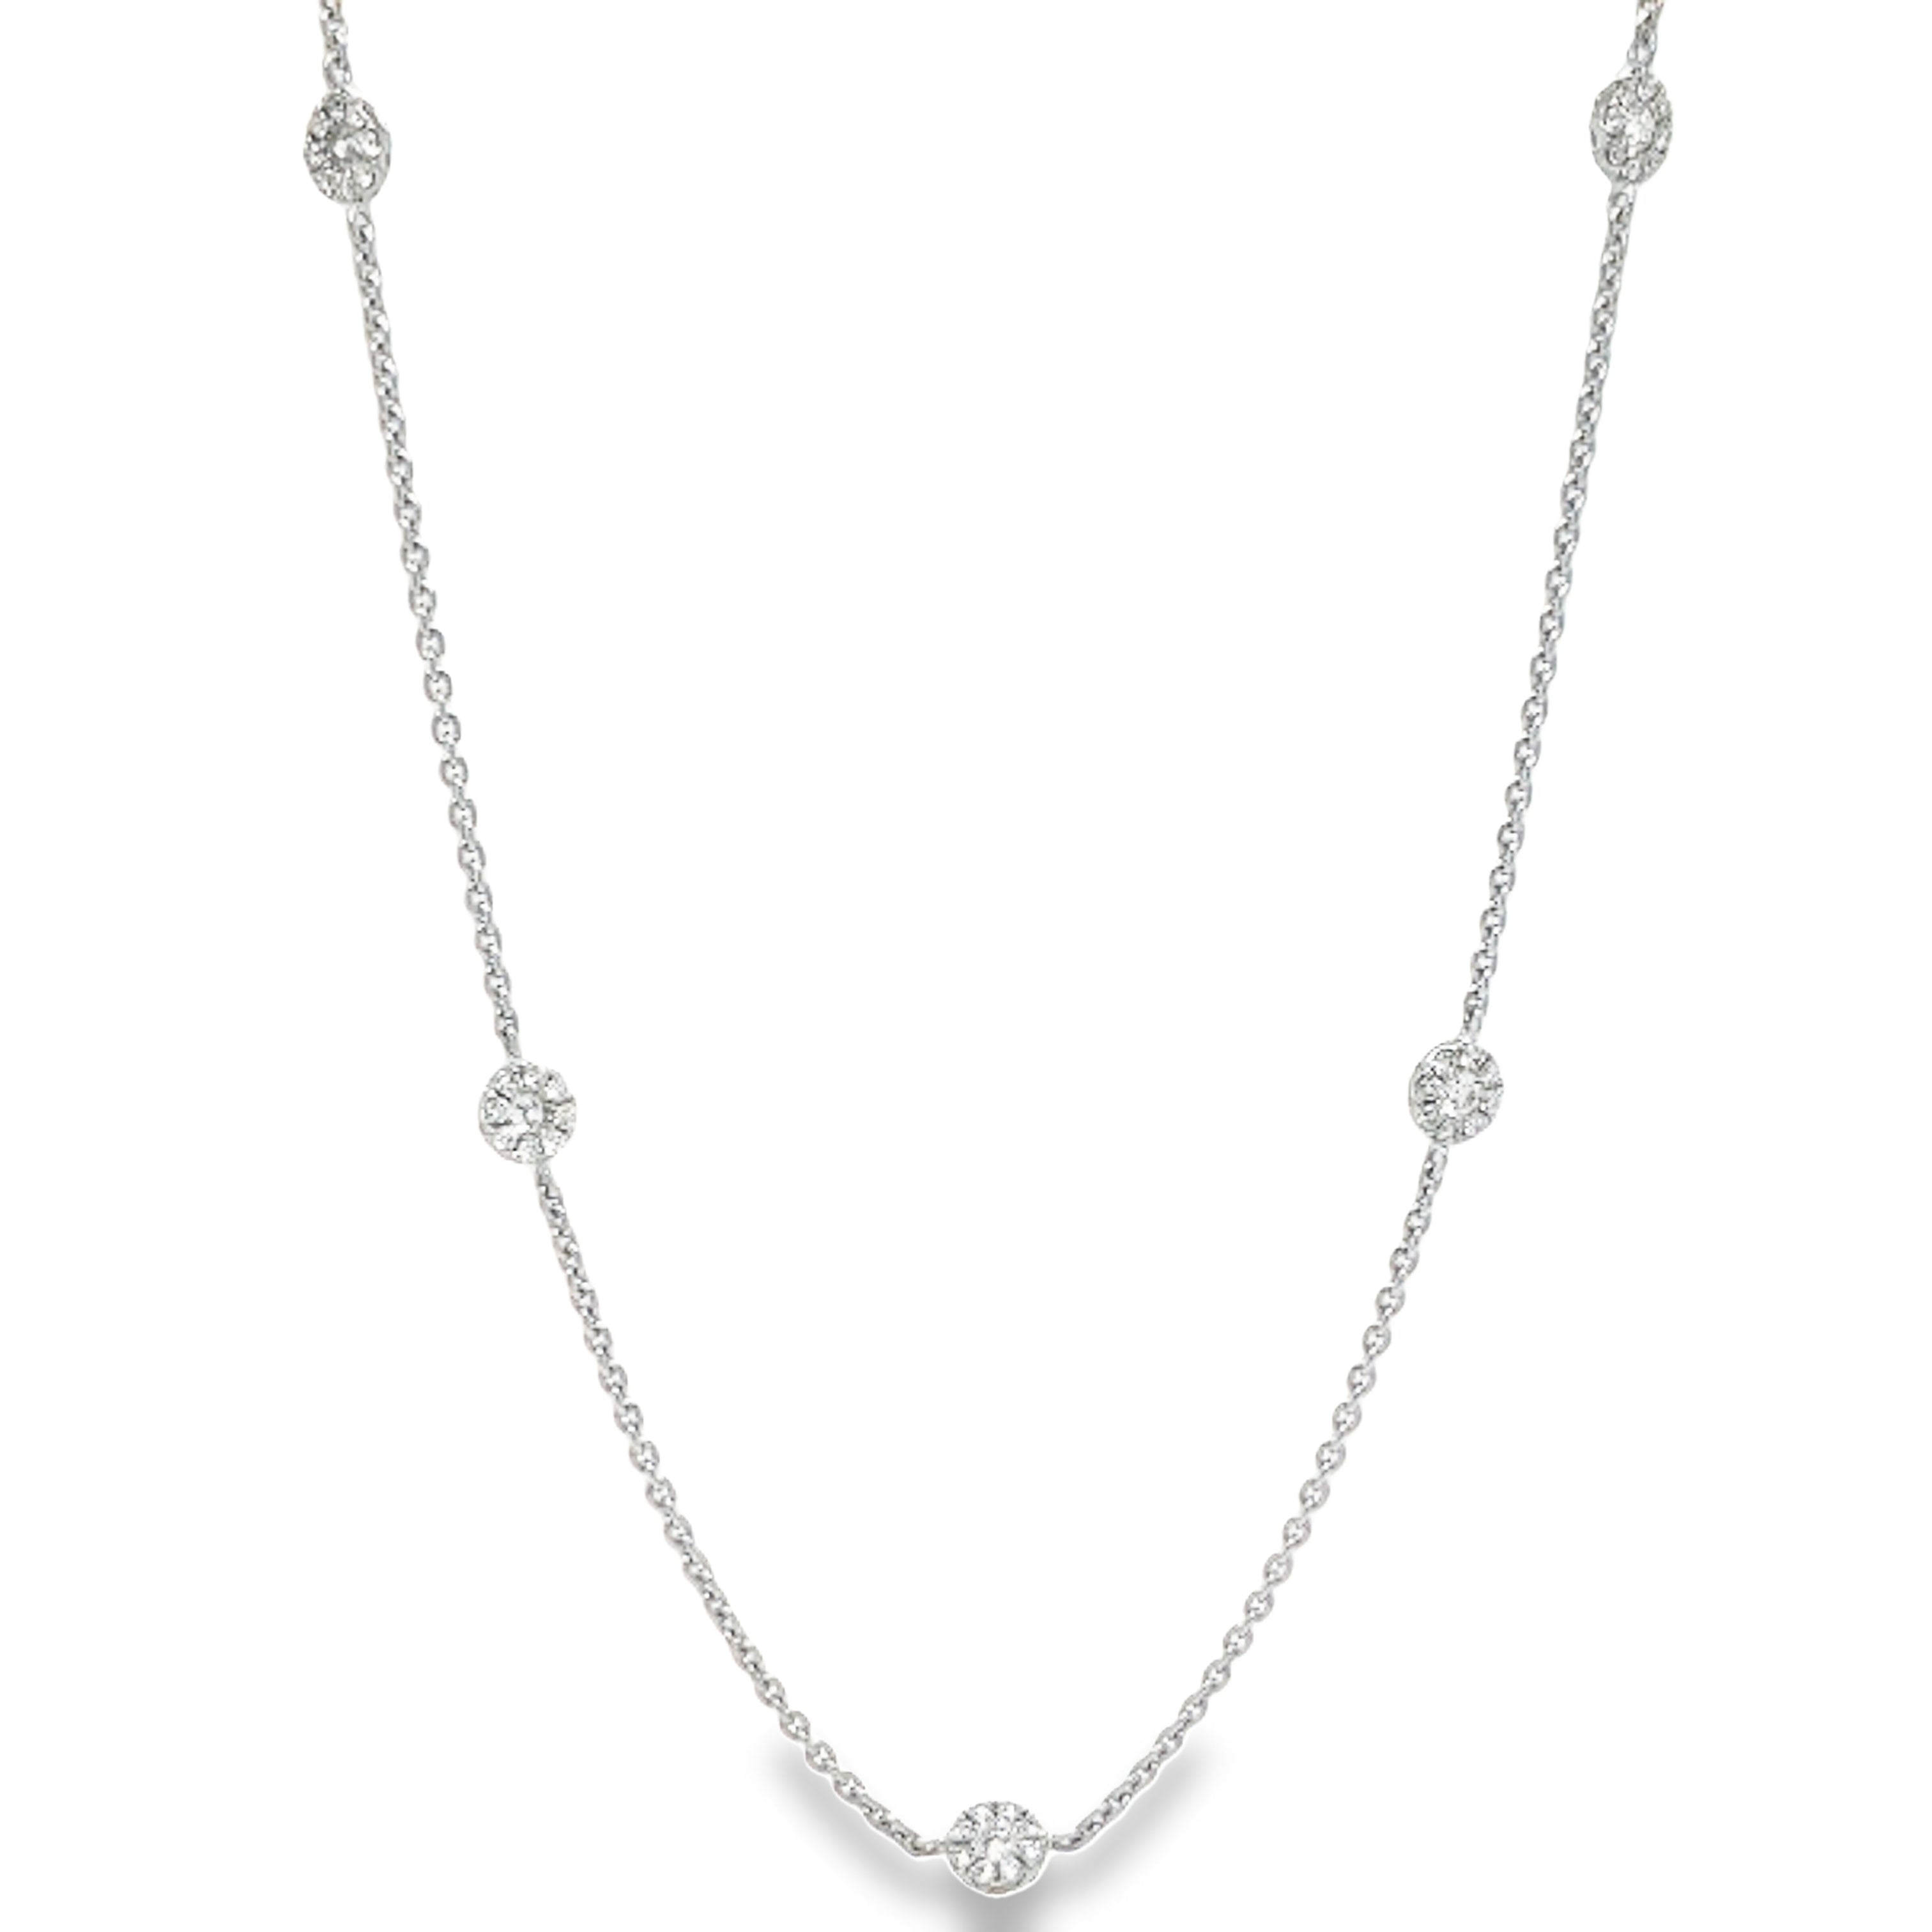 Shimmer and shine with our Diamond Rondelle Necklace! This stunning piece features 0.74 cts of sparkling diamonds, all set in 5 beautiful 18k white gold halo. The 18" chain adds a touch of elegance to complete this luxurious look. Make a statement of luxury and sophistication with this necklace